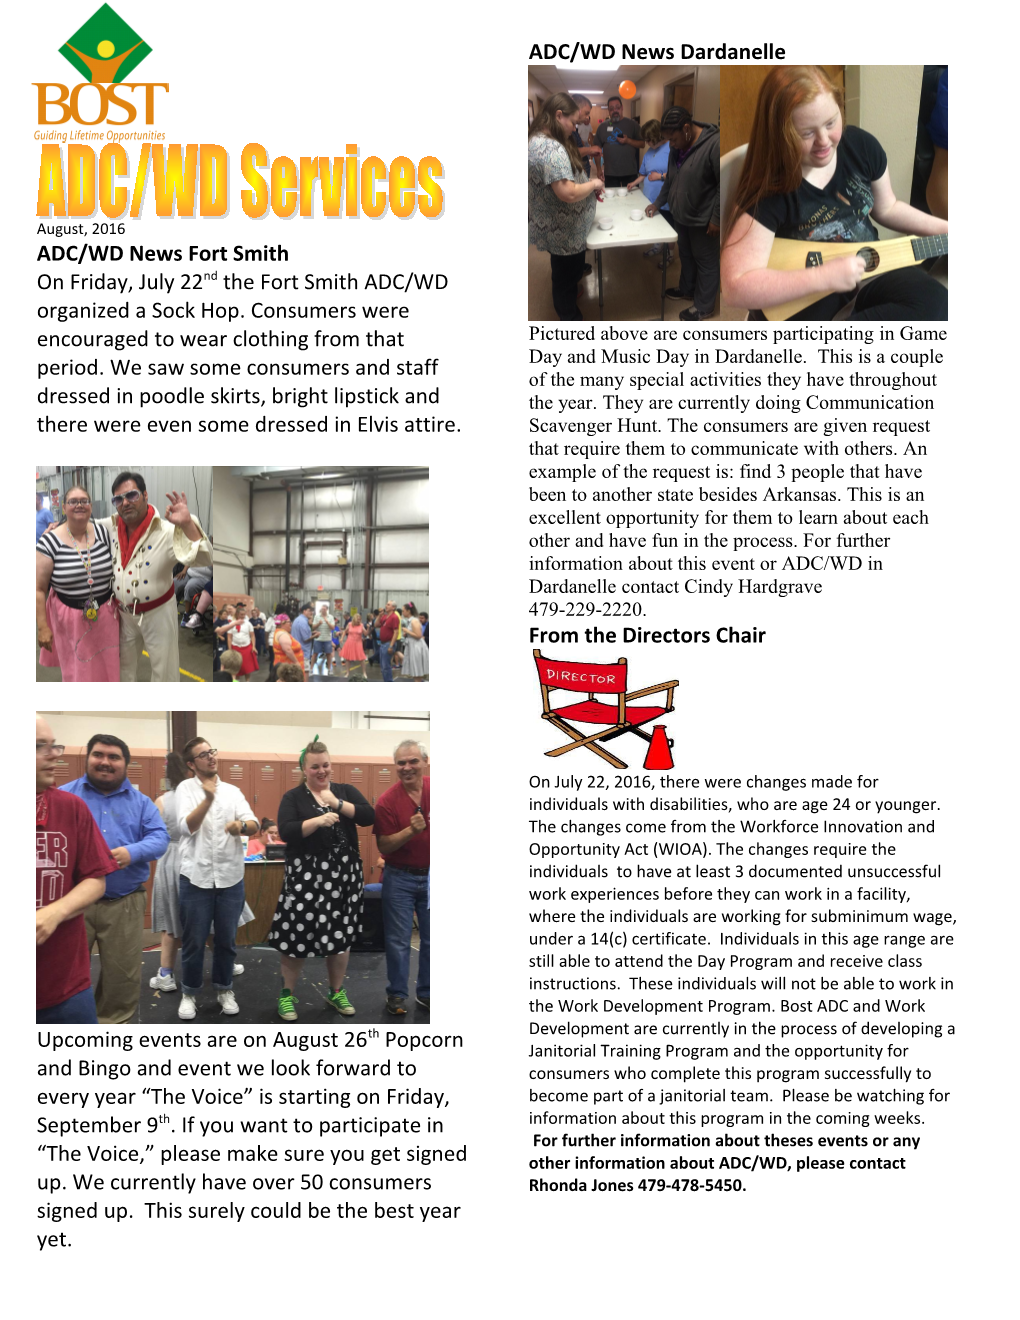 ADC/WD News Fort Smith